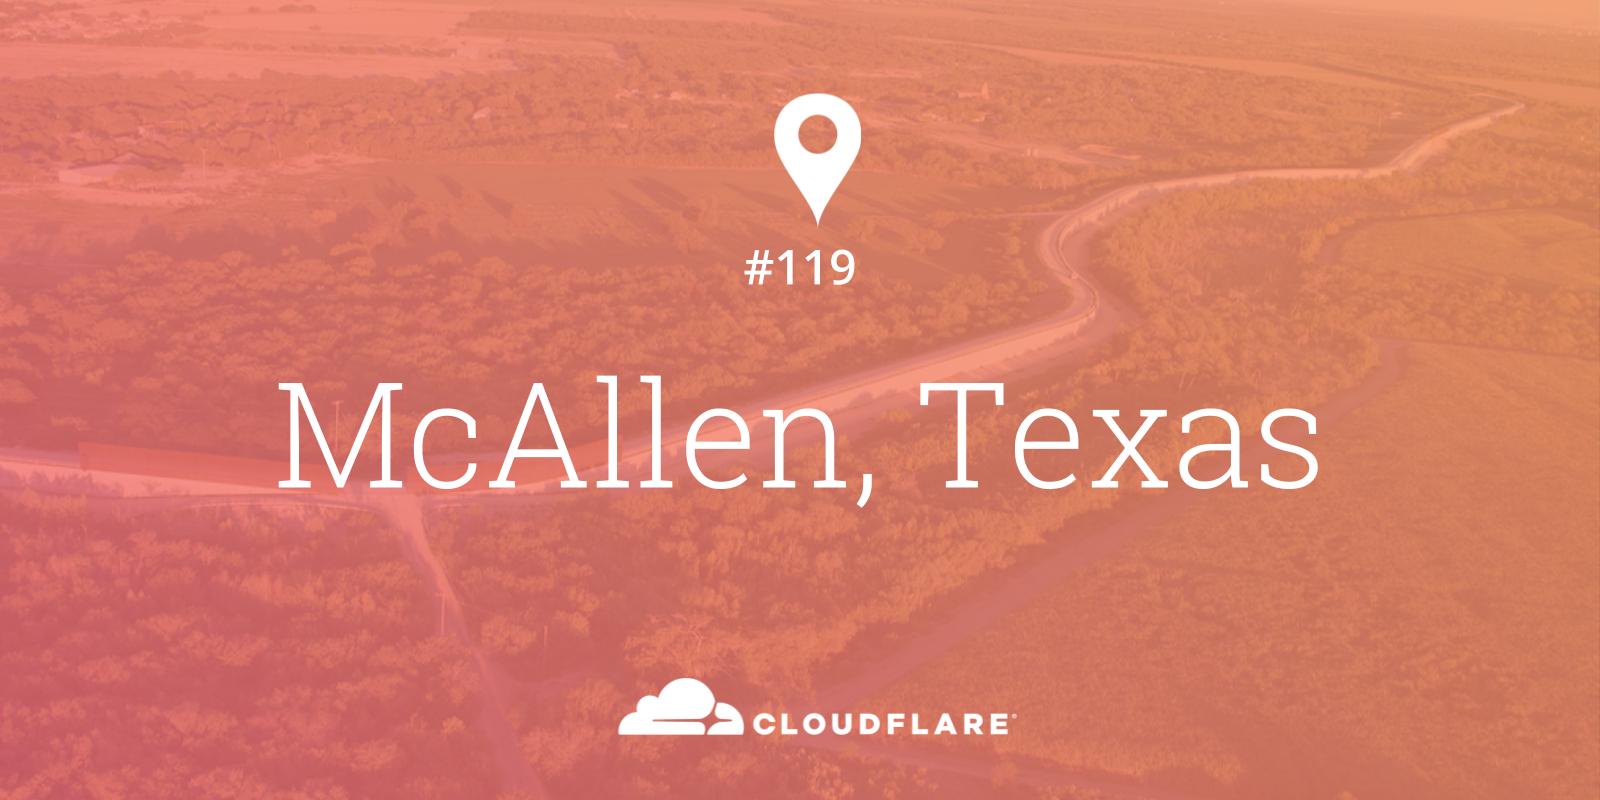 McAllen, Texas: Cloudflare opens 119th Data Center just north of the Mexico border